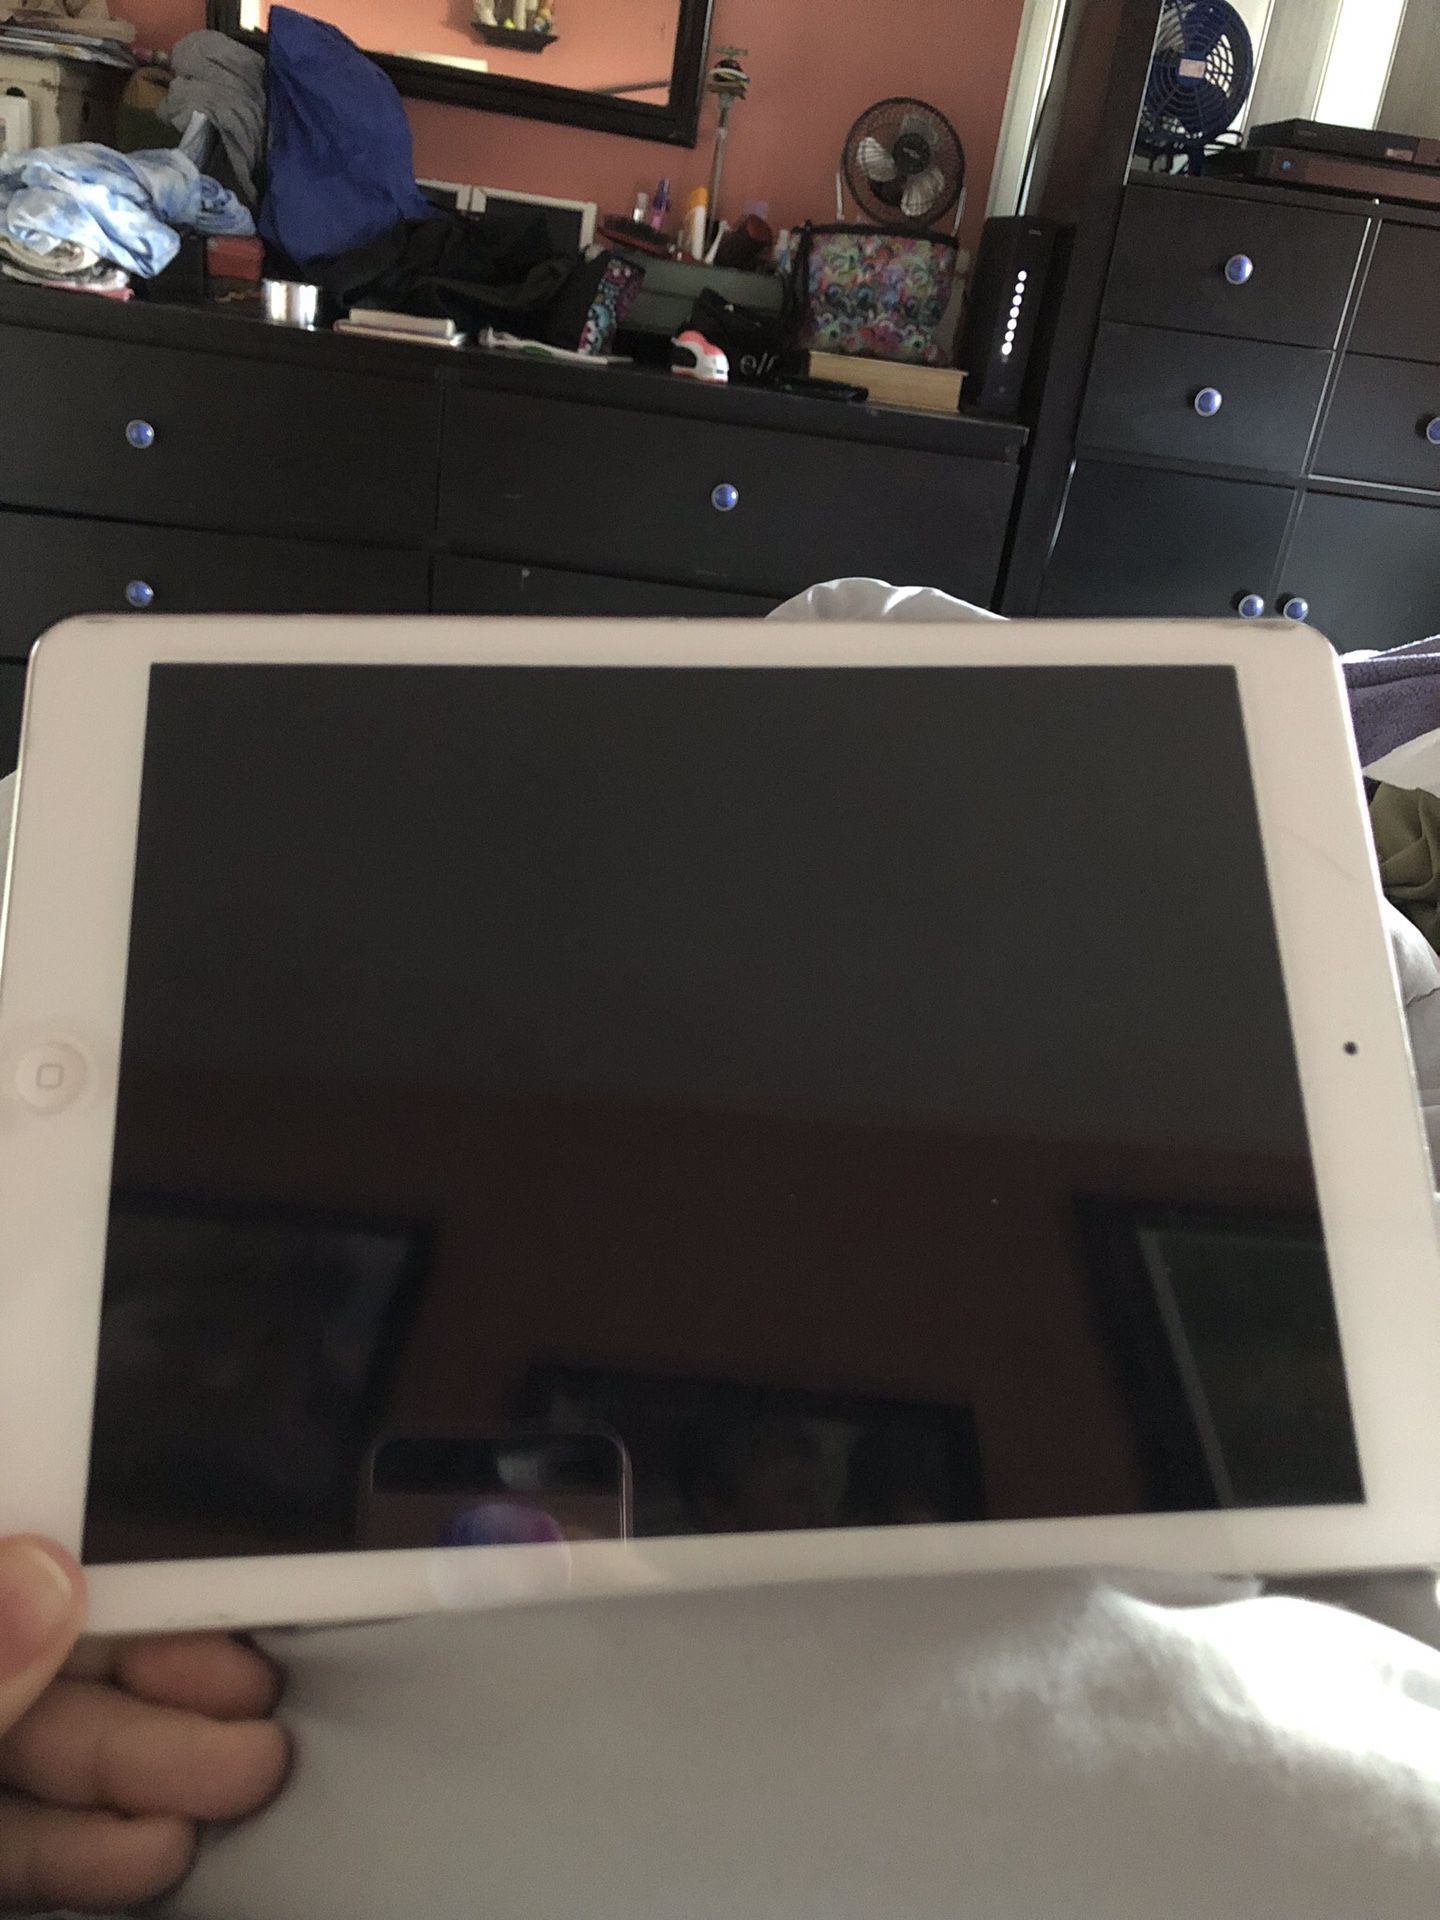 TWO IPAD AIR(S) 16GB BOTH EXCELLENT CONDITION; ONE HAS A SCREEN PROTECTOR; SERIOUS INQUIRIES ONLY!!!